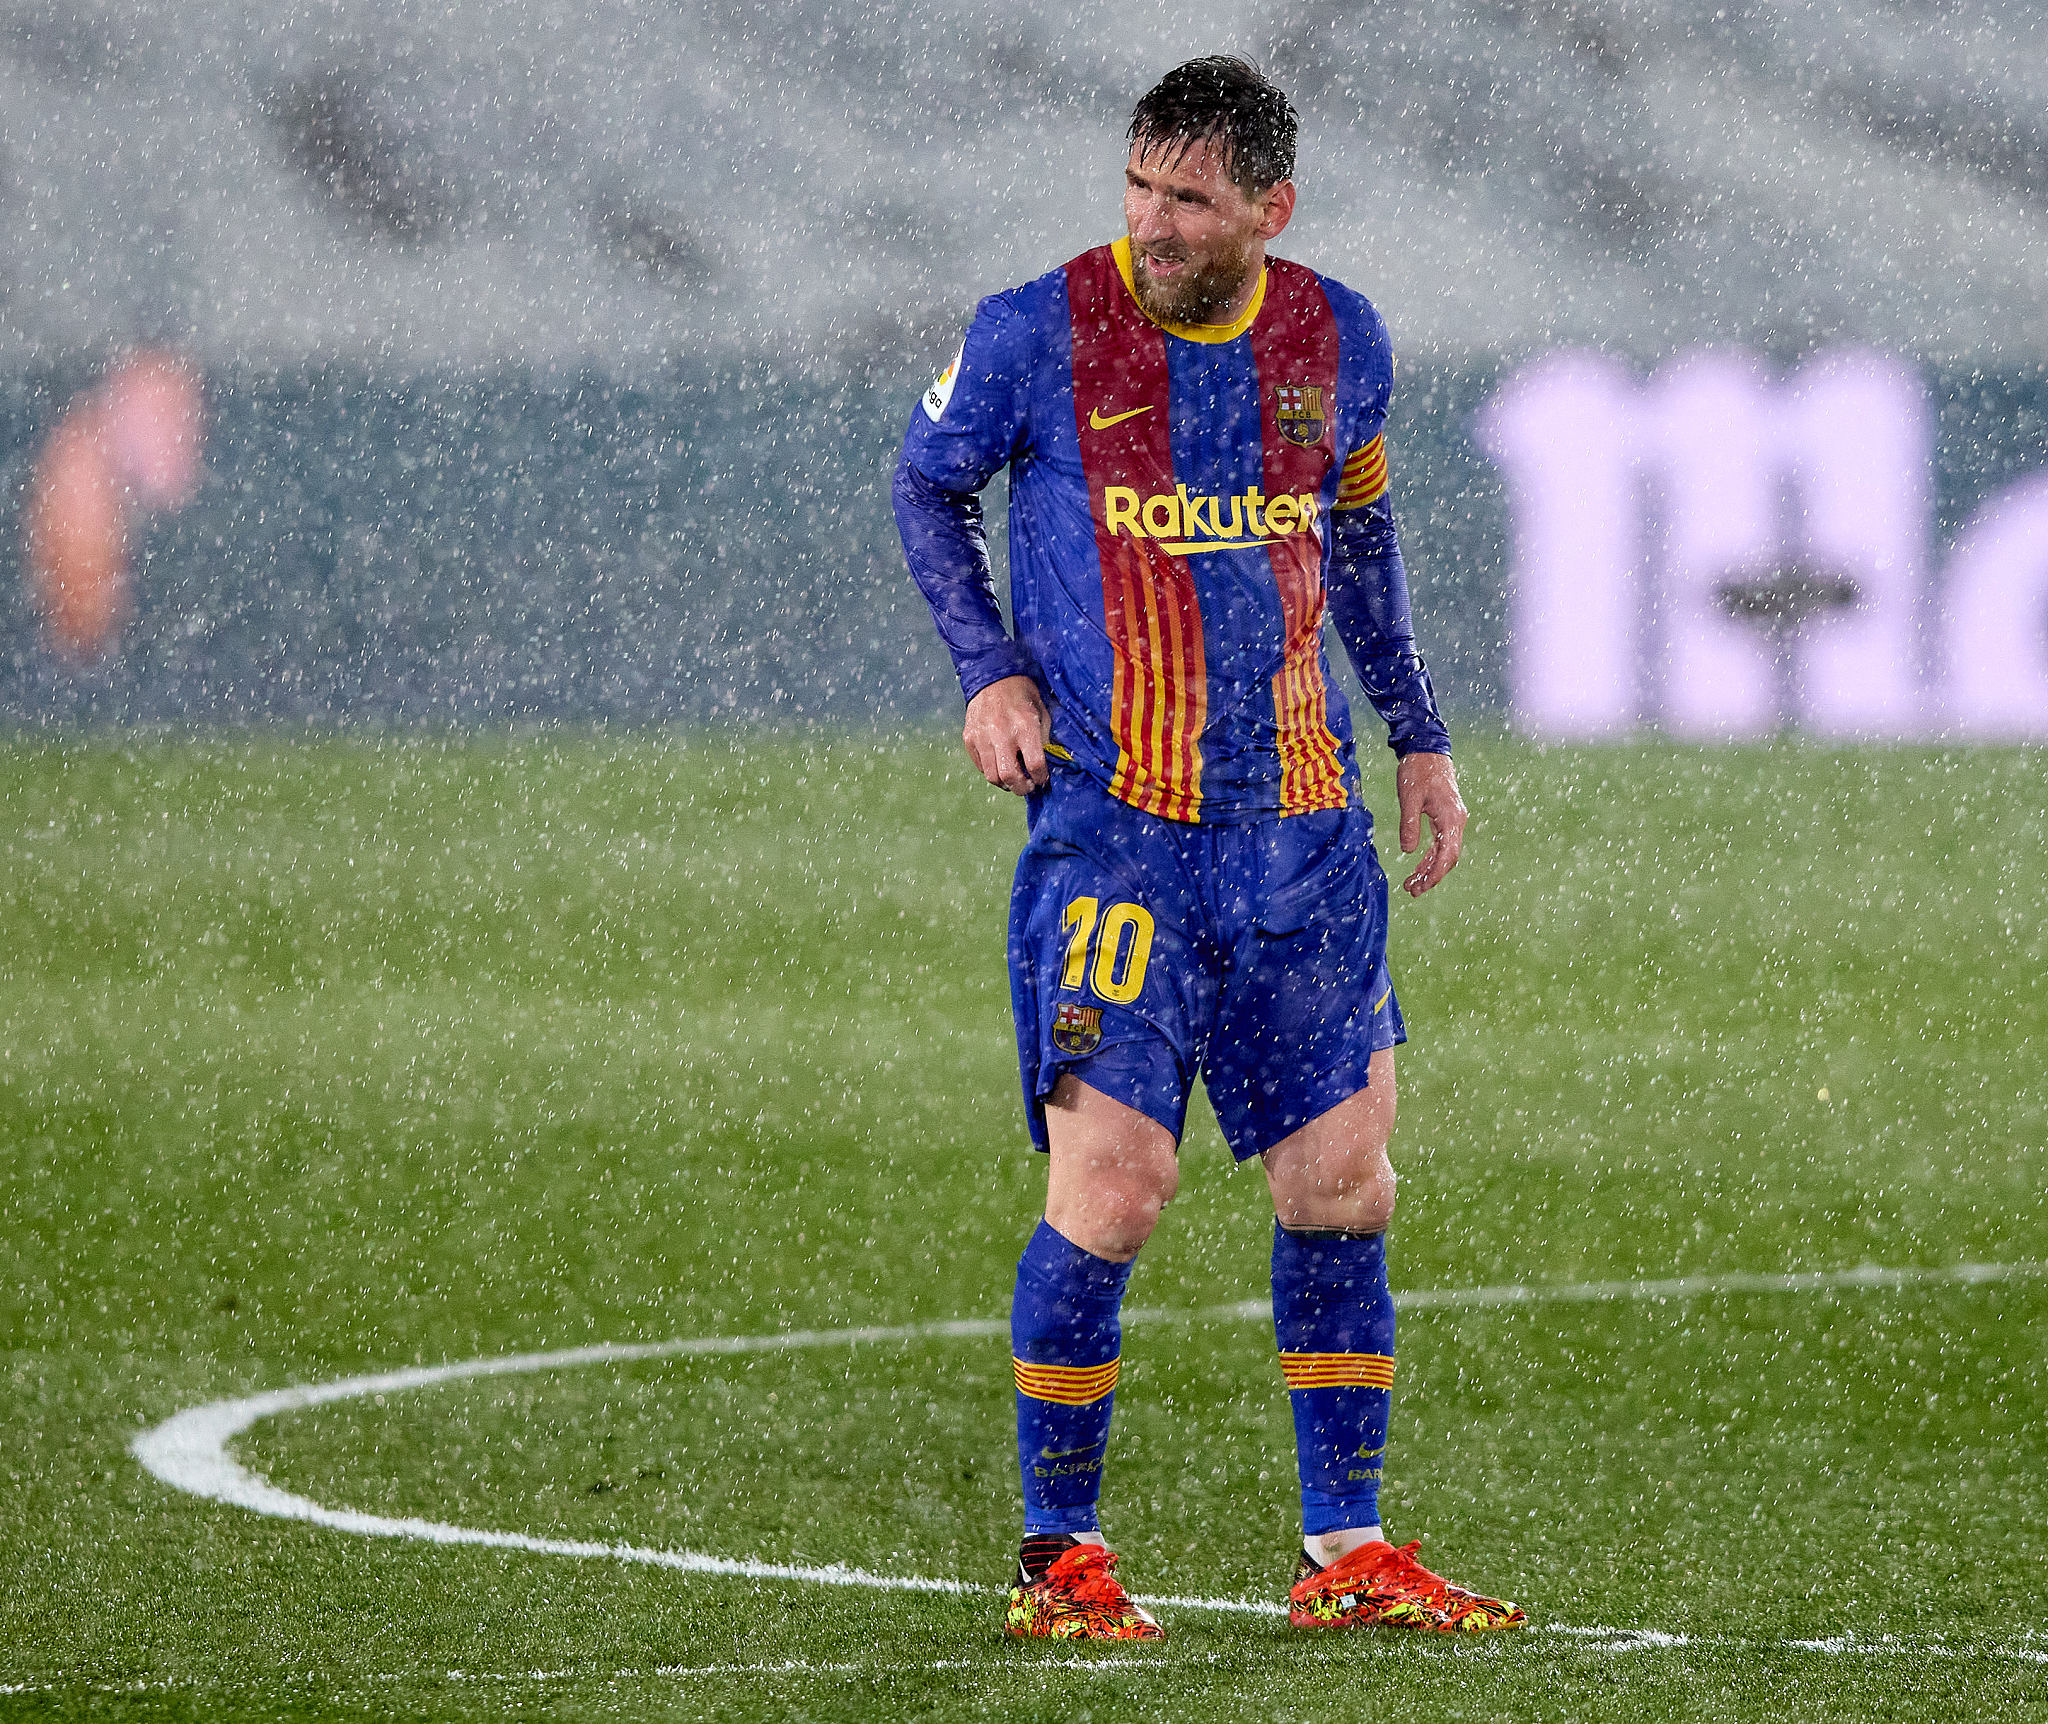 A sogged Lionel Messi is shivering on the pitch as torrential rain disrupts...